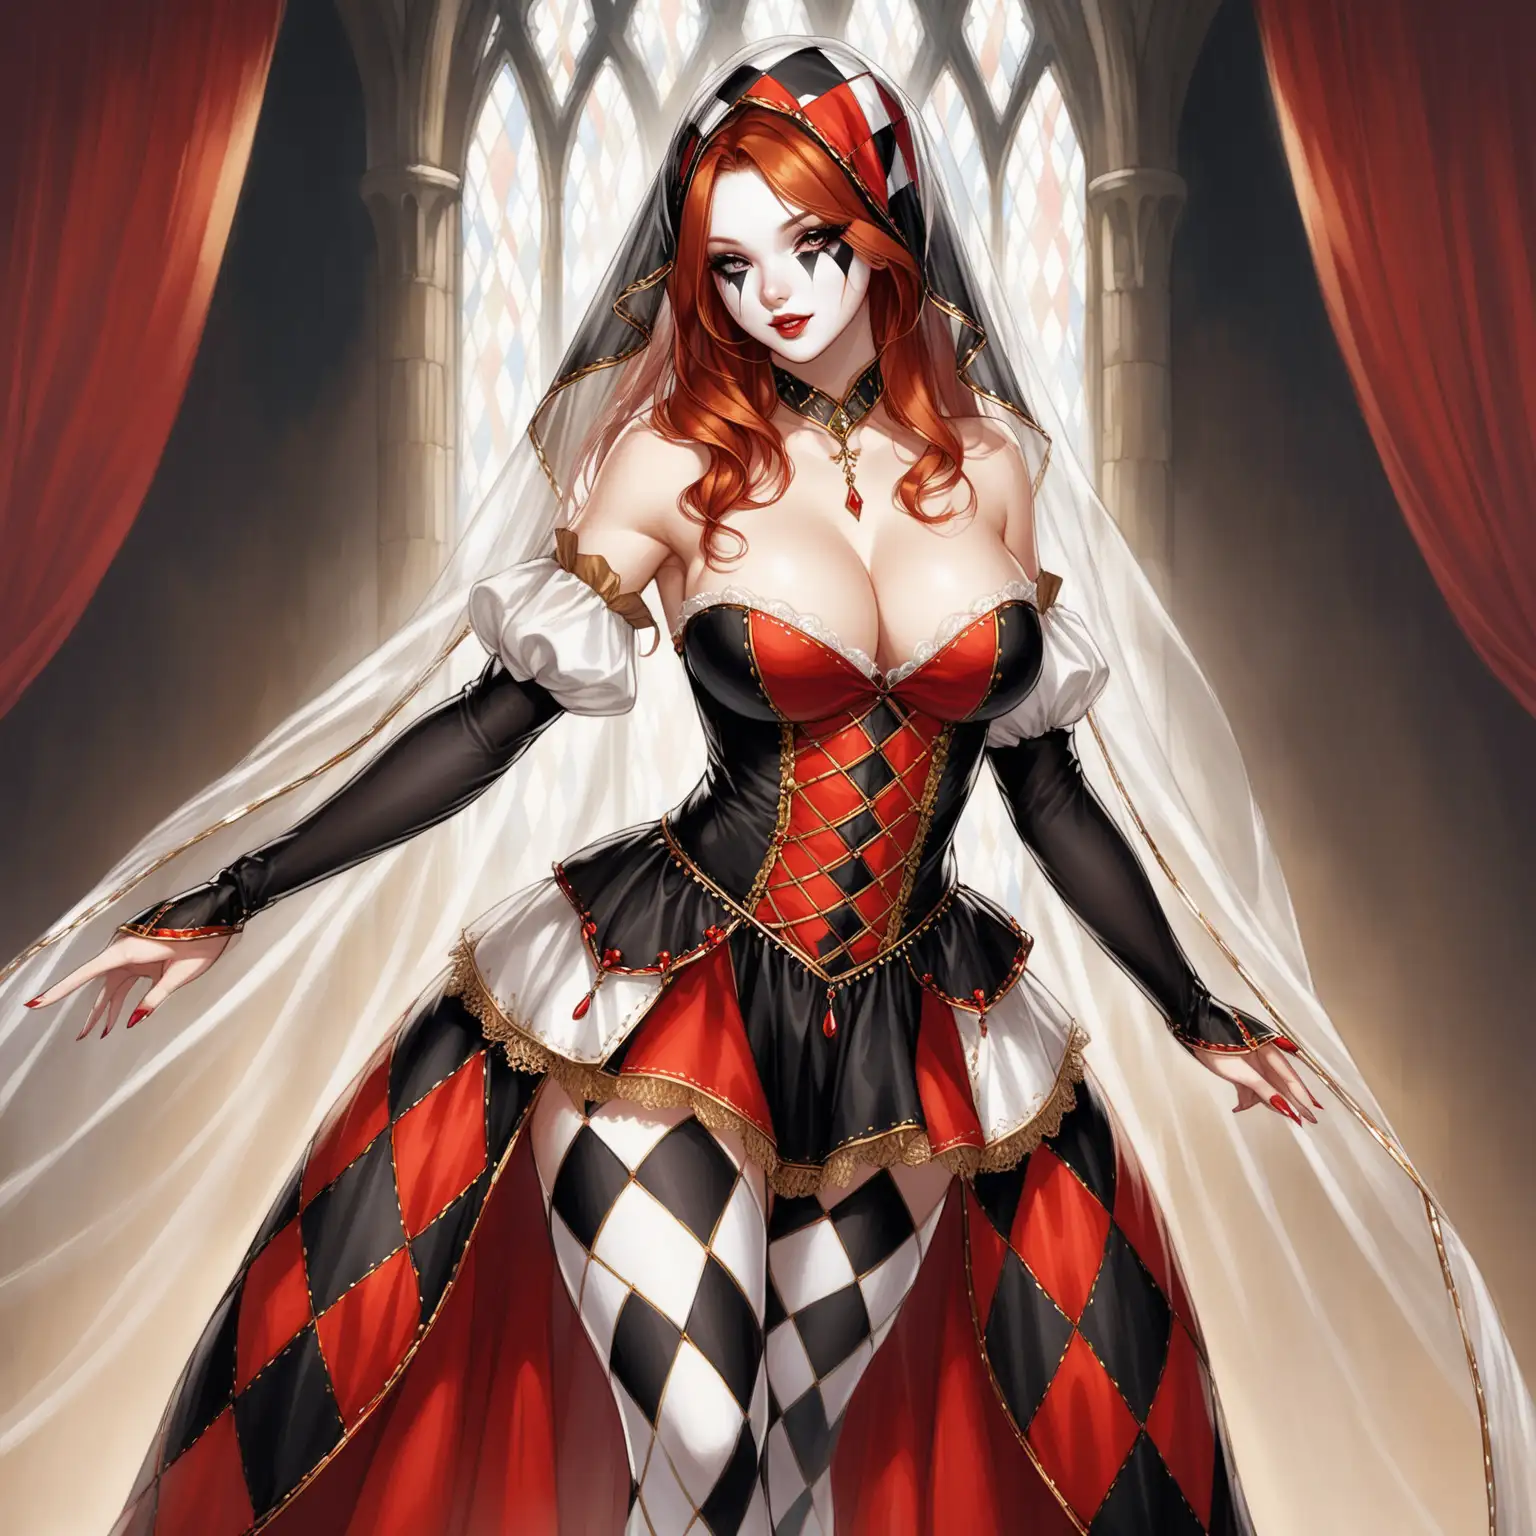 a veiled in sashes, sexy harlequin beauty , golden auburn hair, large breasted dancer, wearing silken sheer black red and white medieval harlequin , topless,